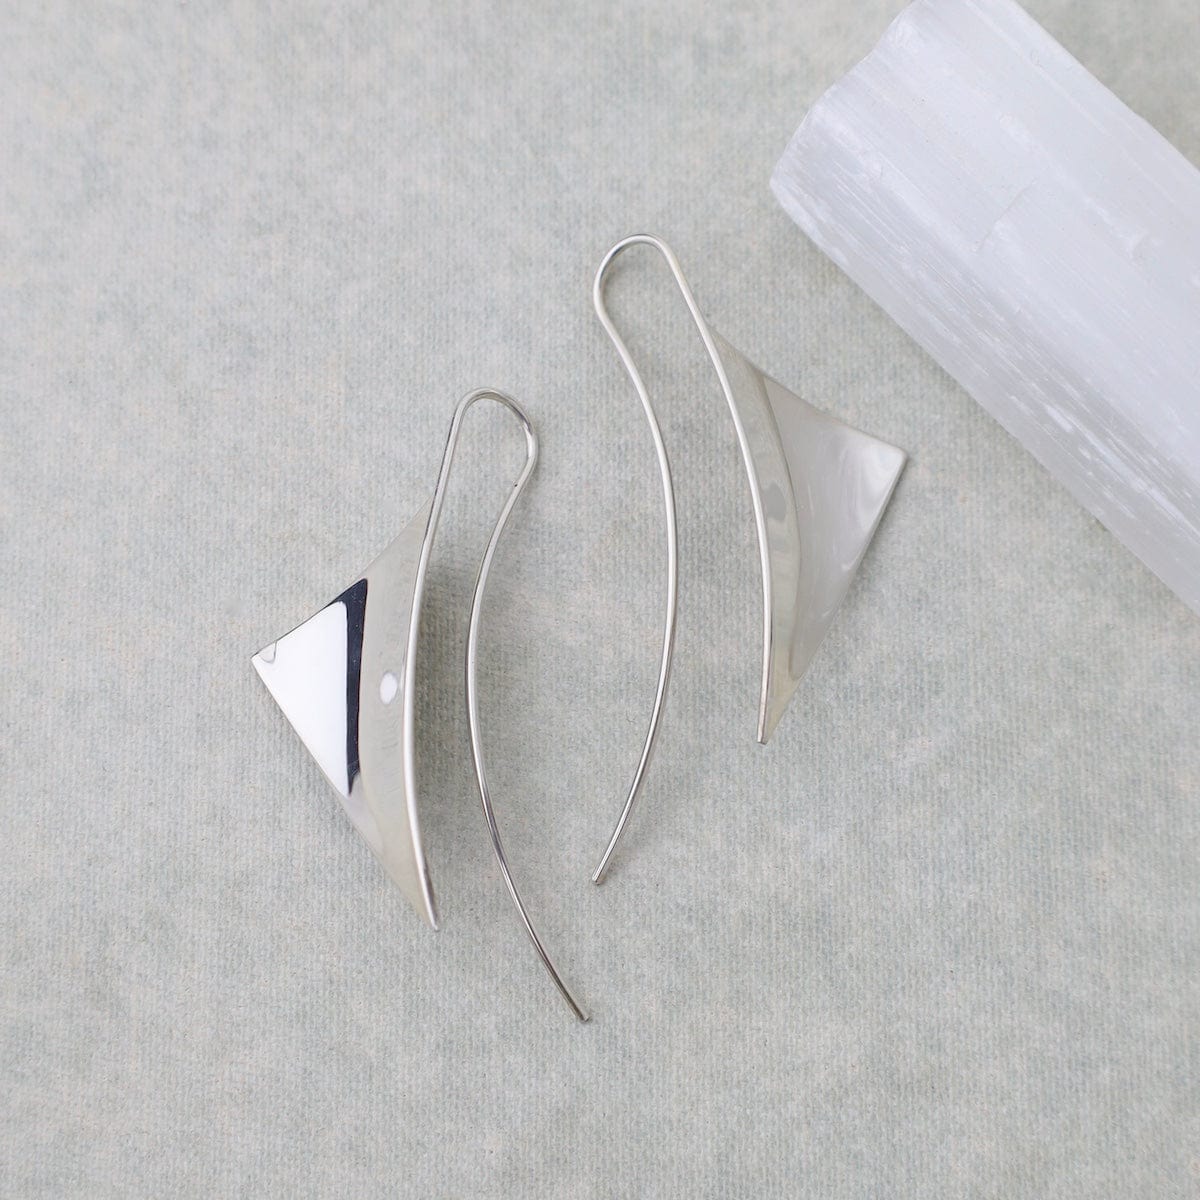 EAR Small Concave Triangle Banner Earrings